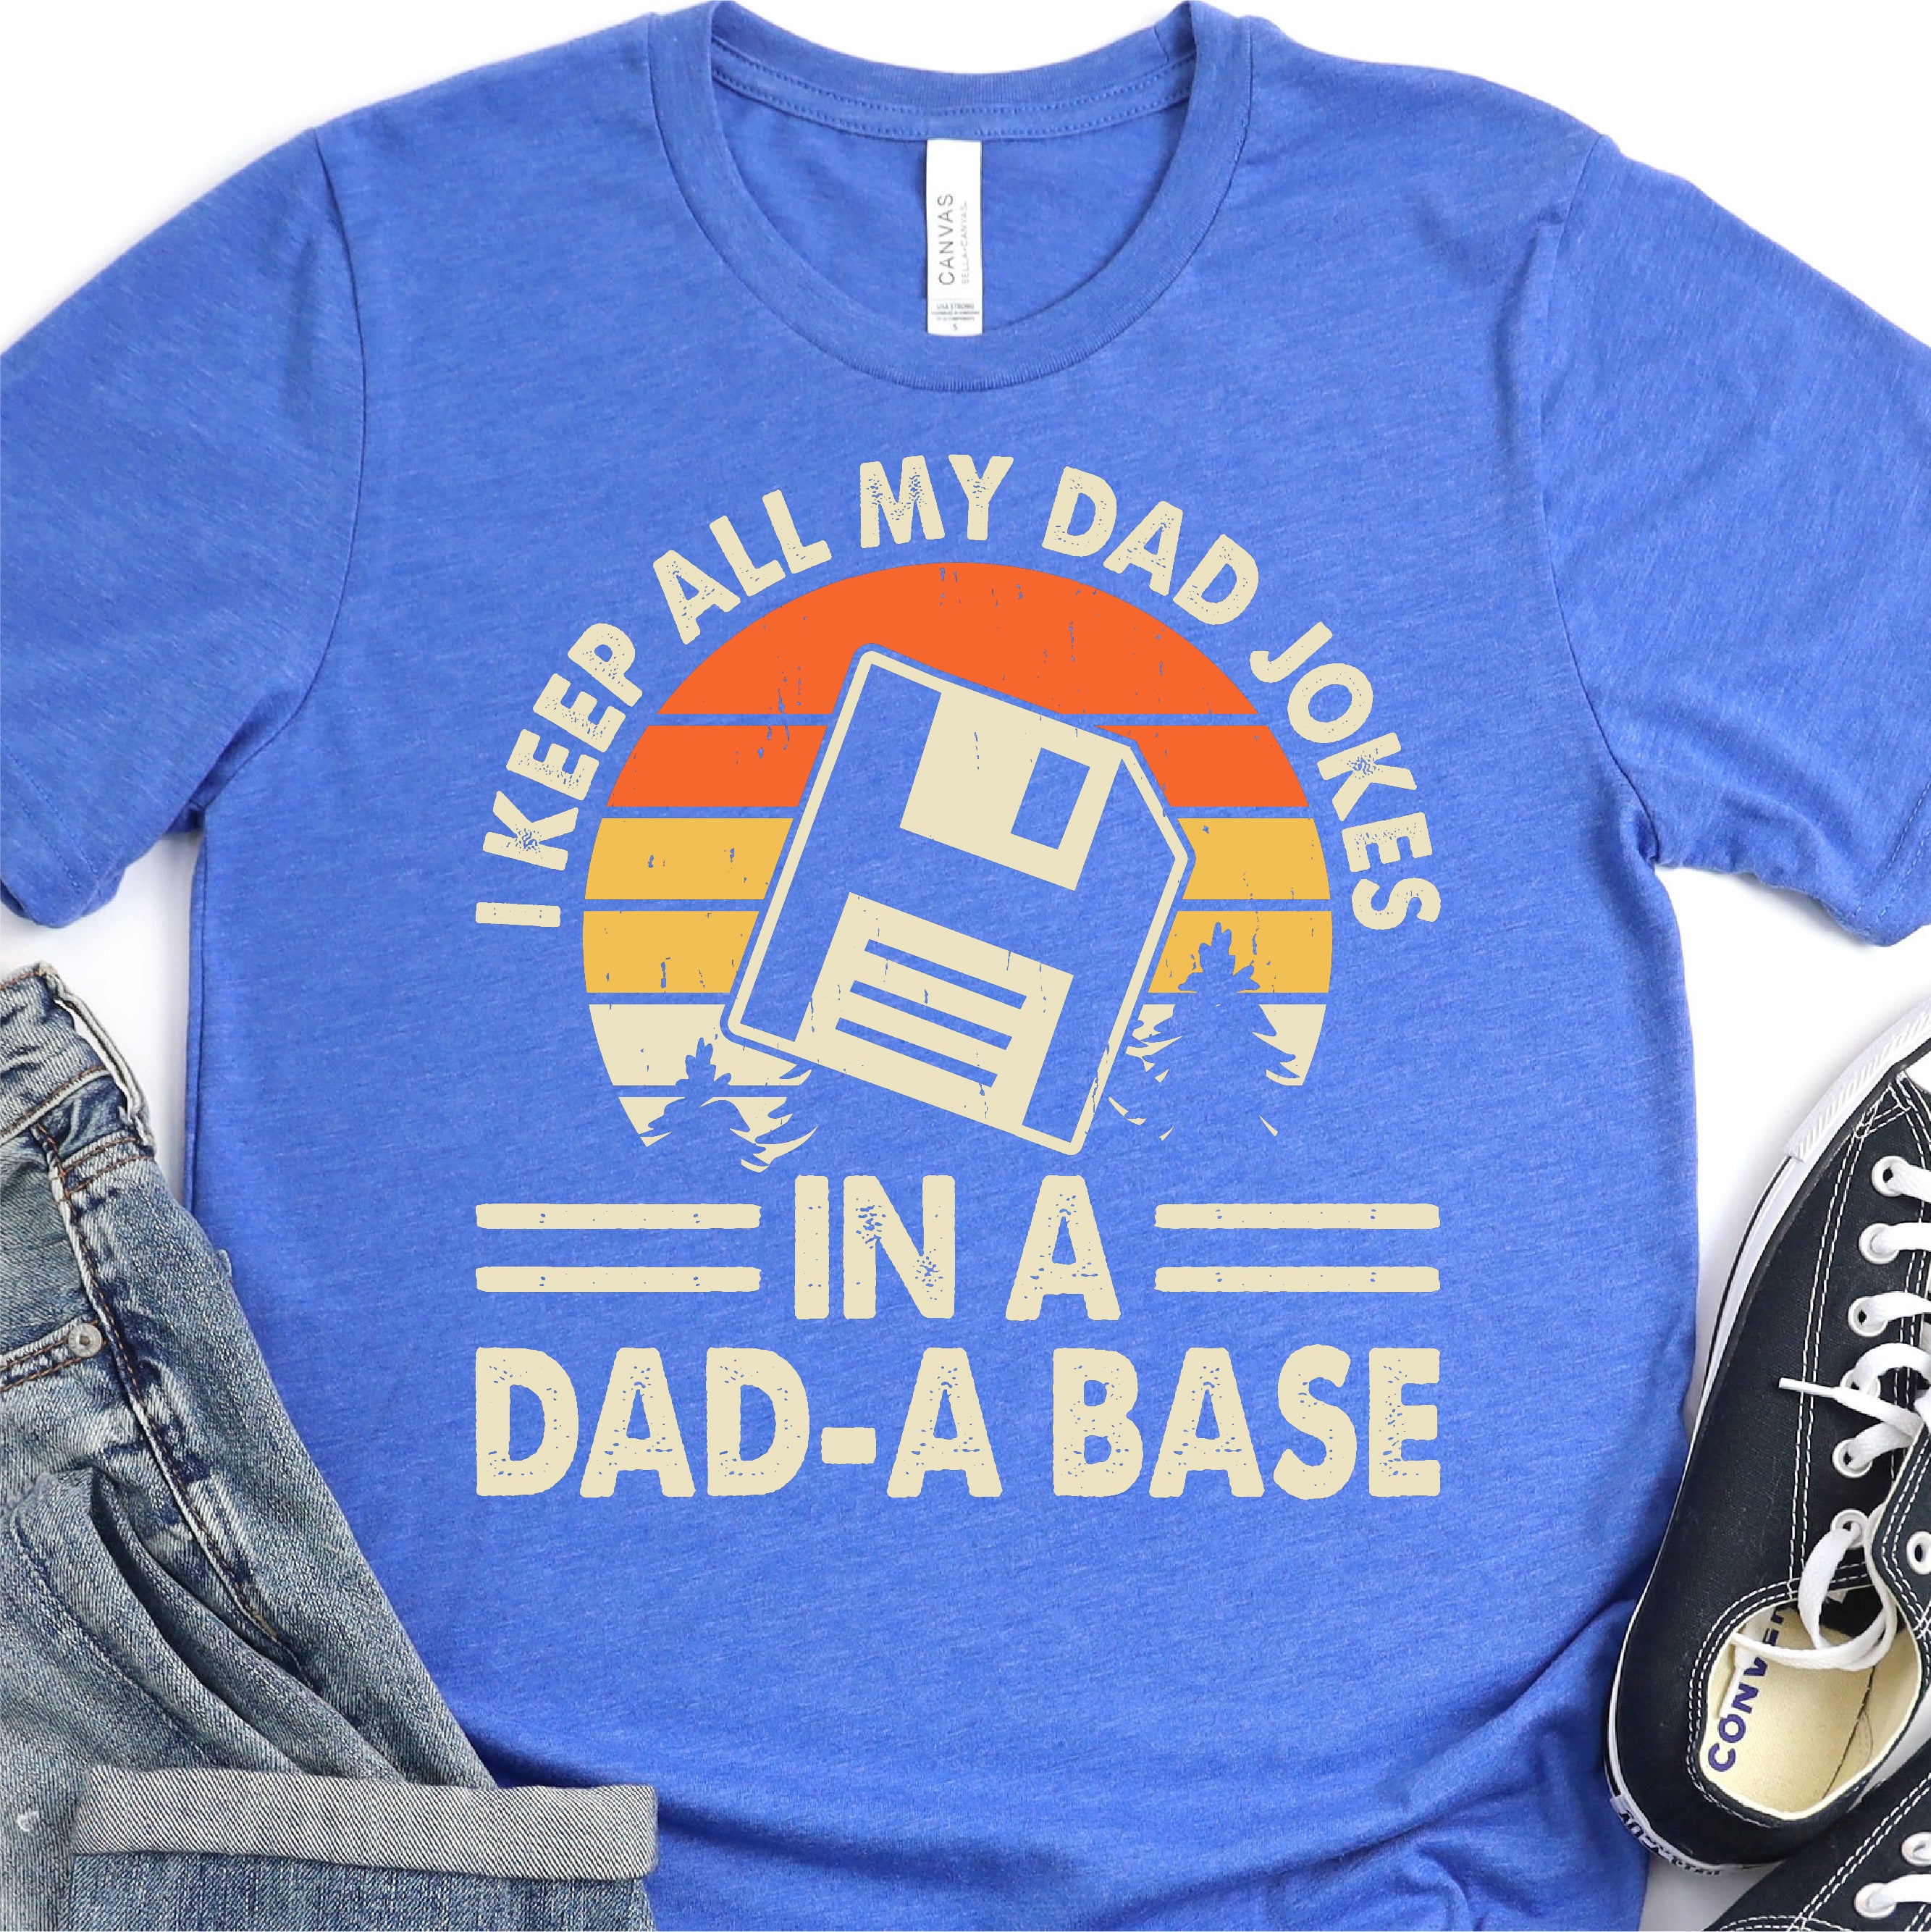 I Keep All My Dad Jokes In A Dad-A Base - Punny Shirts - Father's Day DTF  Transfer - T-shirt Transfer For Dad